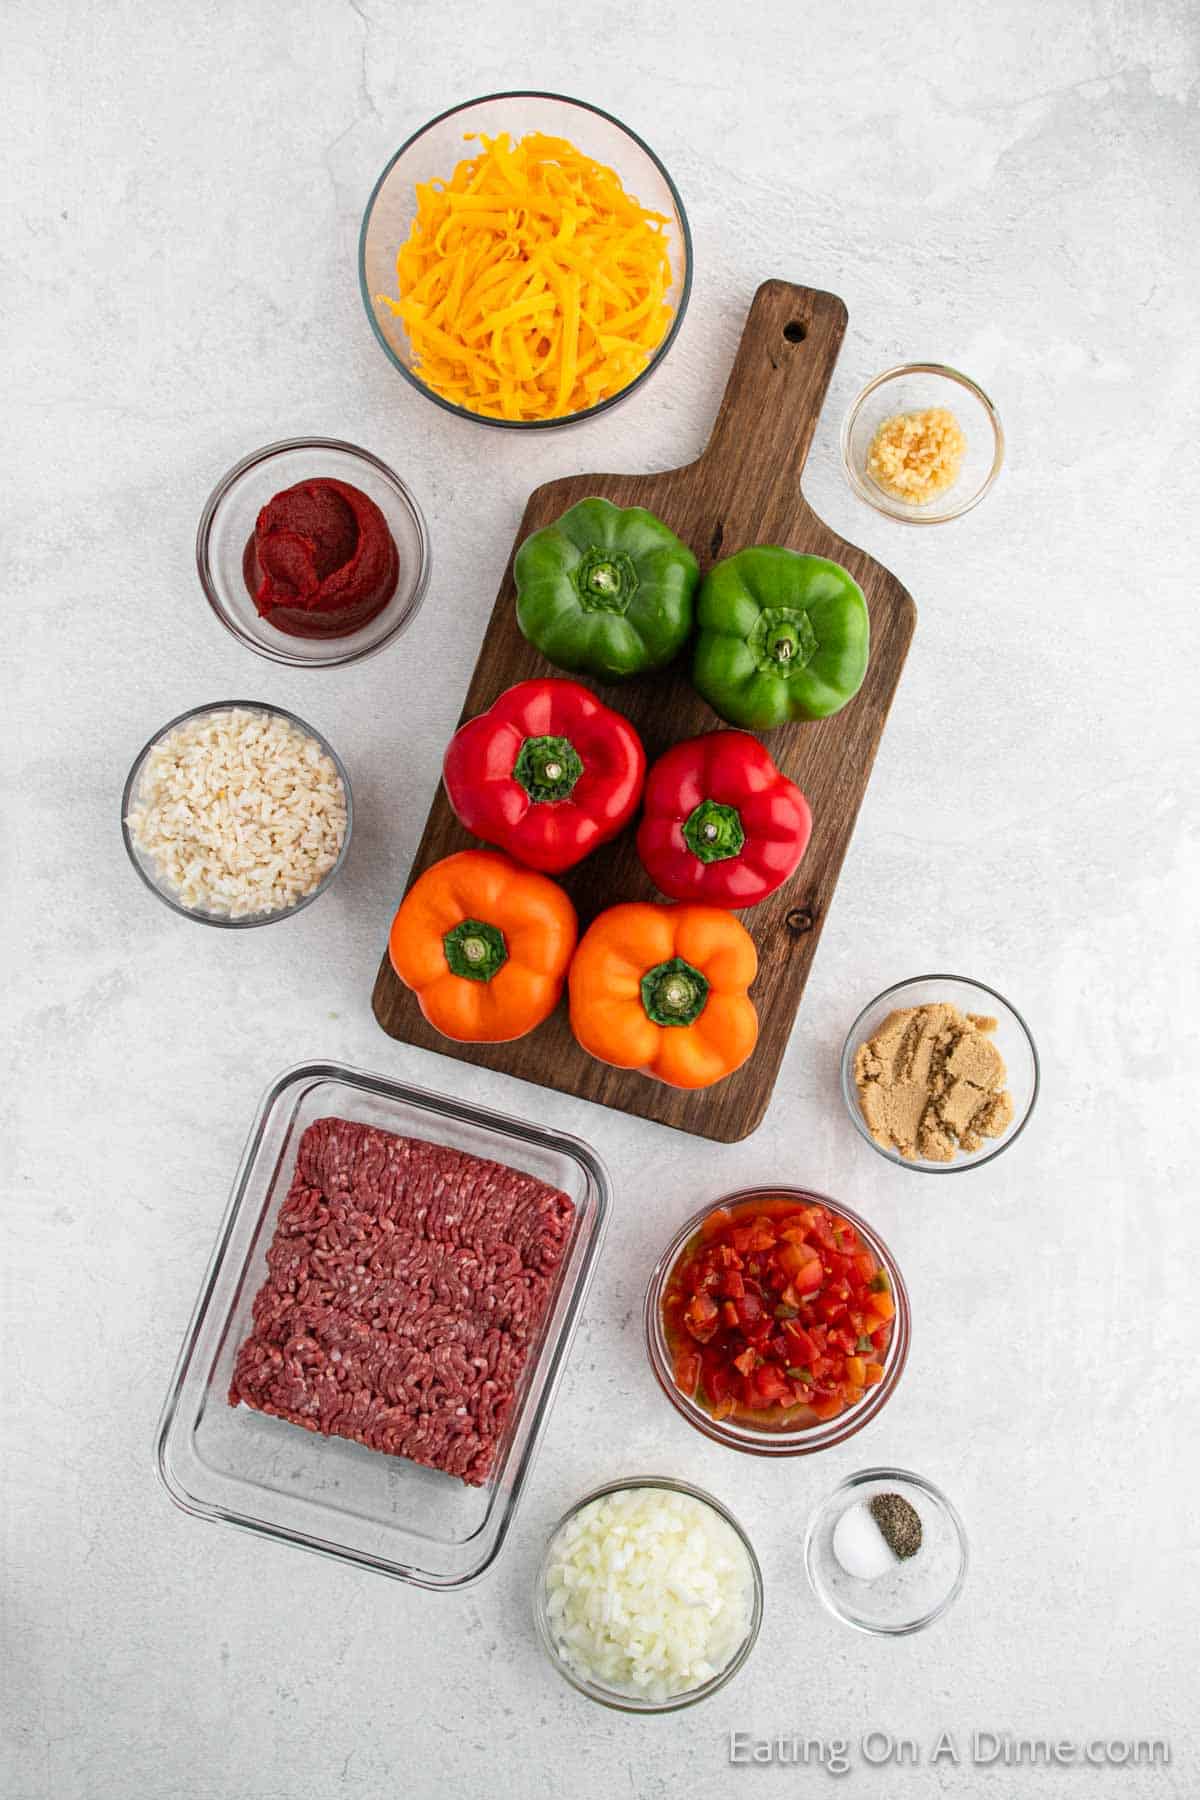 Ingredients - bowl of shredded cheese, tomato paste, rice, green, red, orange bell peppers, minced garlic, brown sugar, ground beef, diced tomatoes with green chilies, diced onions, salt, pepper